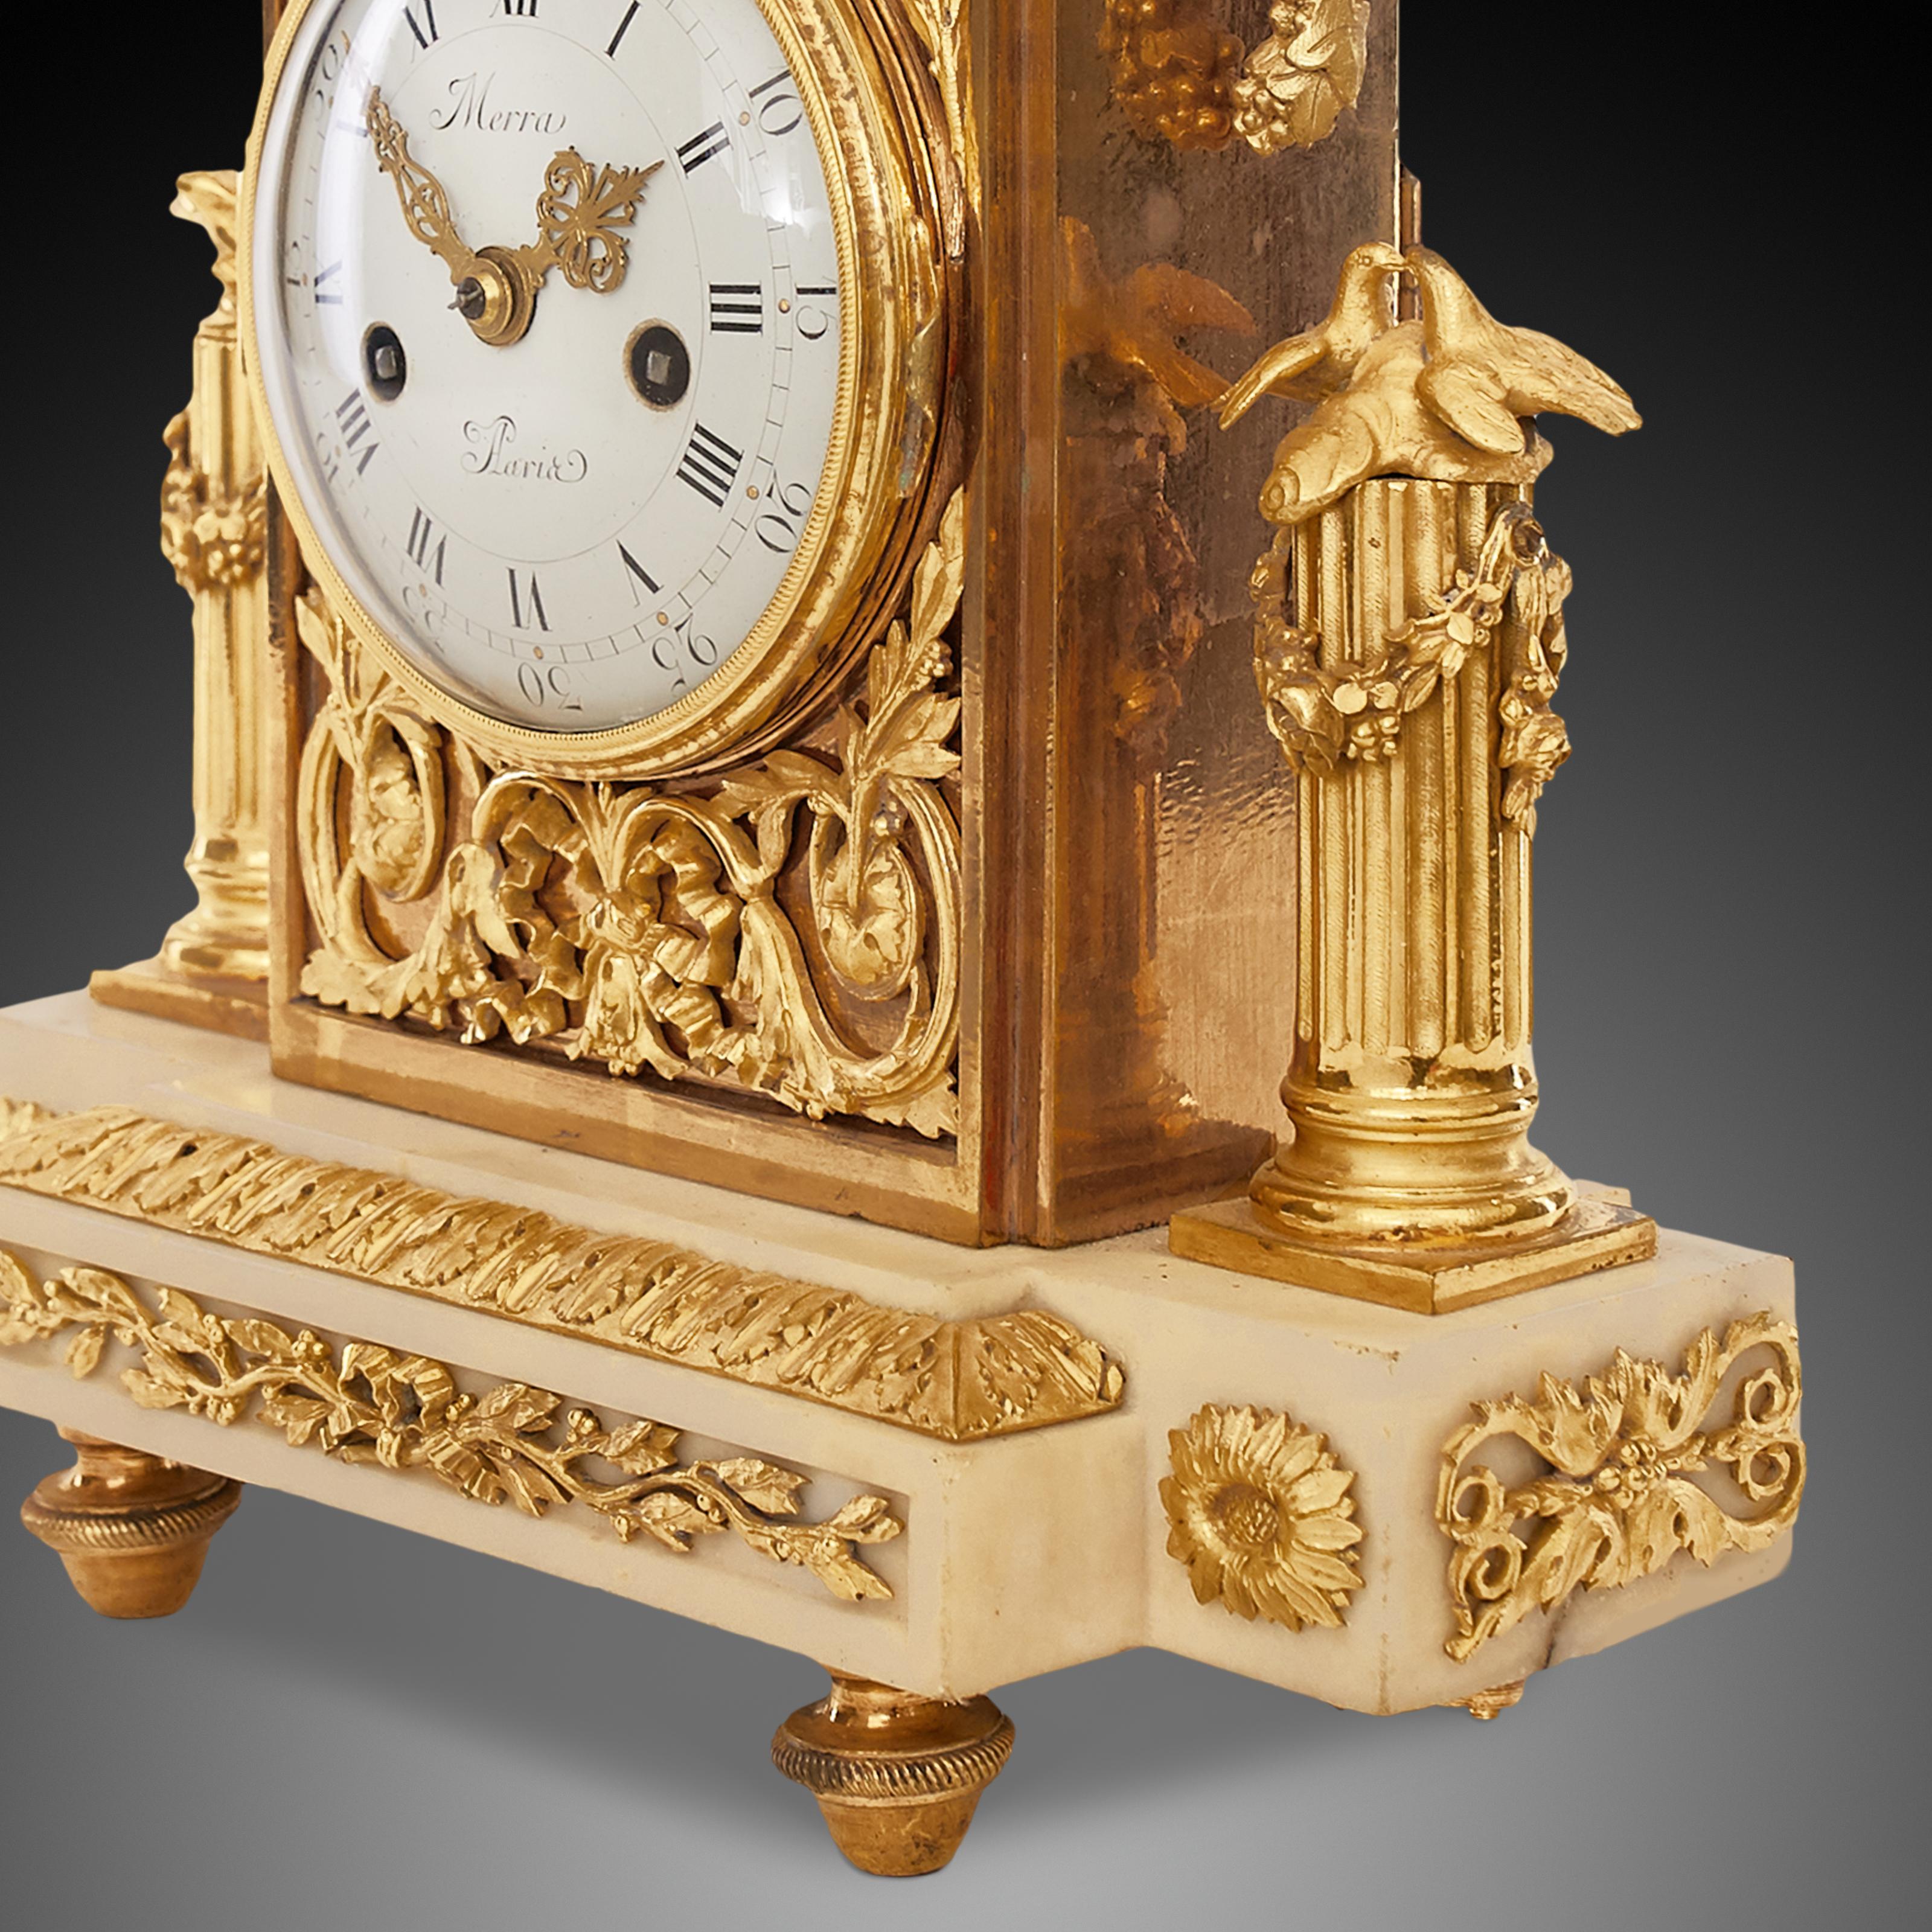 Mantel clock 18th century Louis XV period By Merra À Paris.
The clock is in excellent and perfect working condition. In addition, it was recently cleaned and serviced by a professional clockmaker who specializes in maintaining museums.